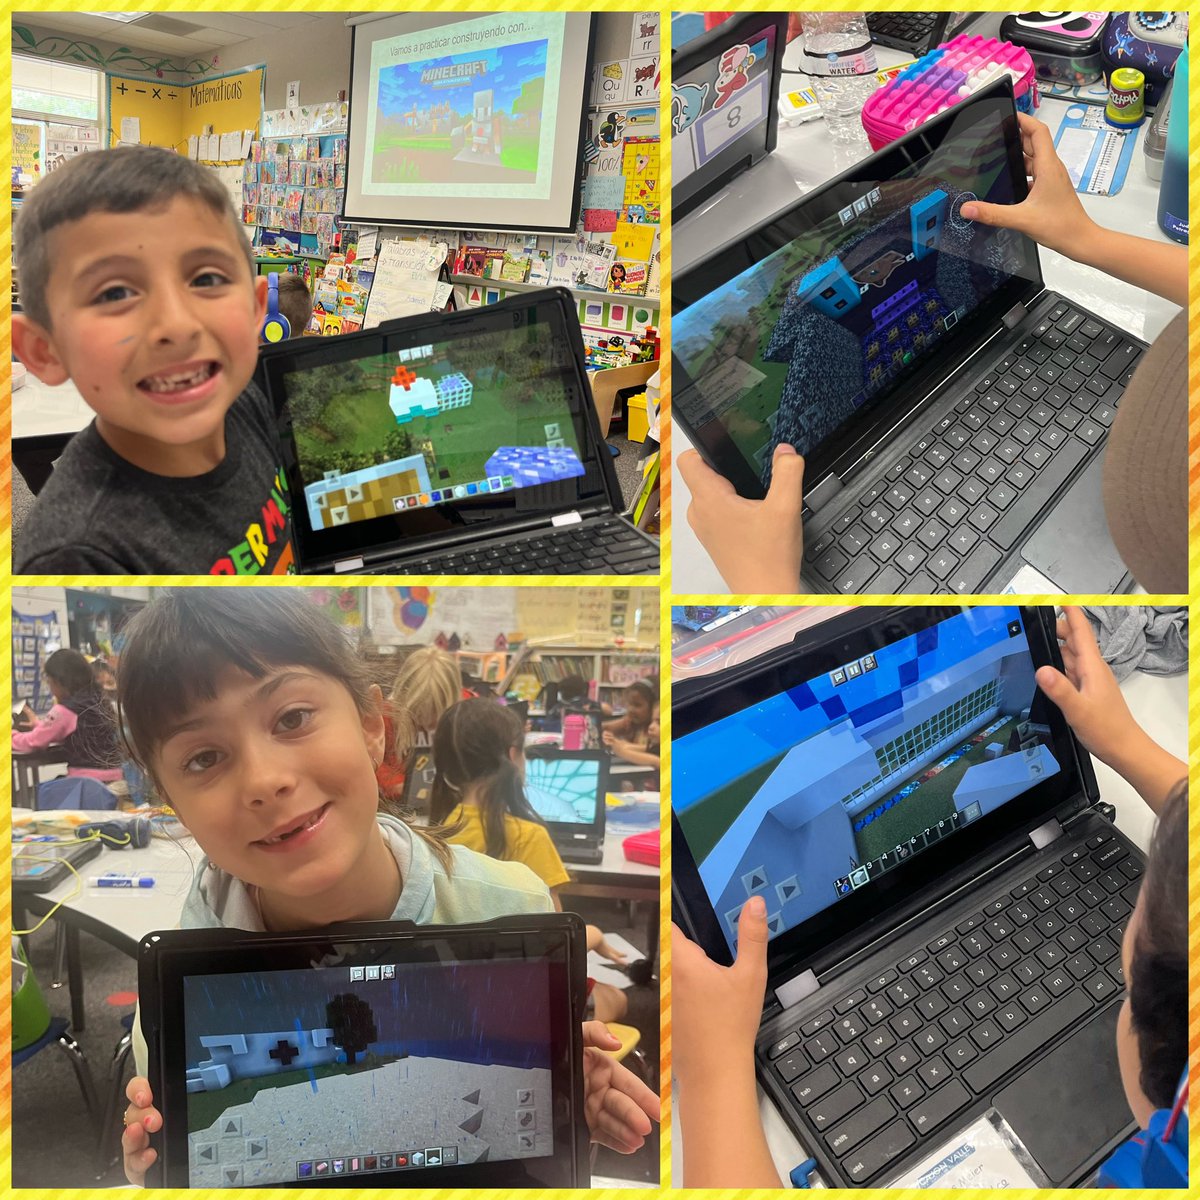 Connecting our #RIASEC occupation interests with Minecraft! @PlayCraftLearn We have a dj stage, an office for programmers, a hospital and vet clinic! #somoslobos @BostoniaGlobal 
 @CajonValleyUSD @MtraRamosR @Danya_BGlobal @EdHidalgoSD @CVWorldofWork